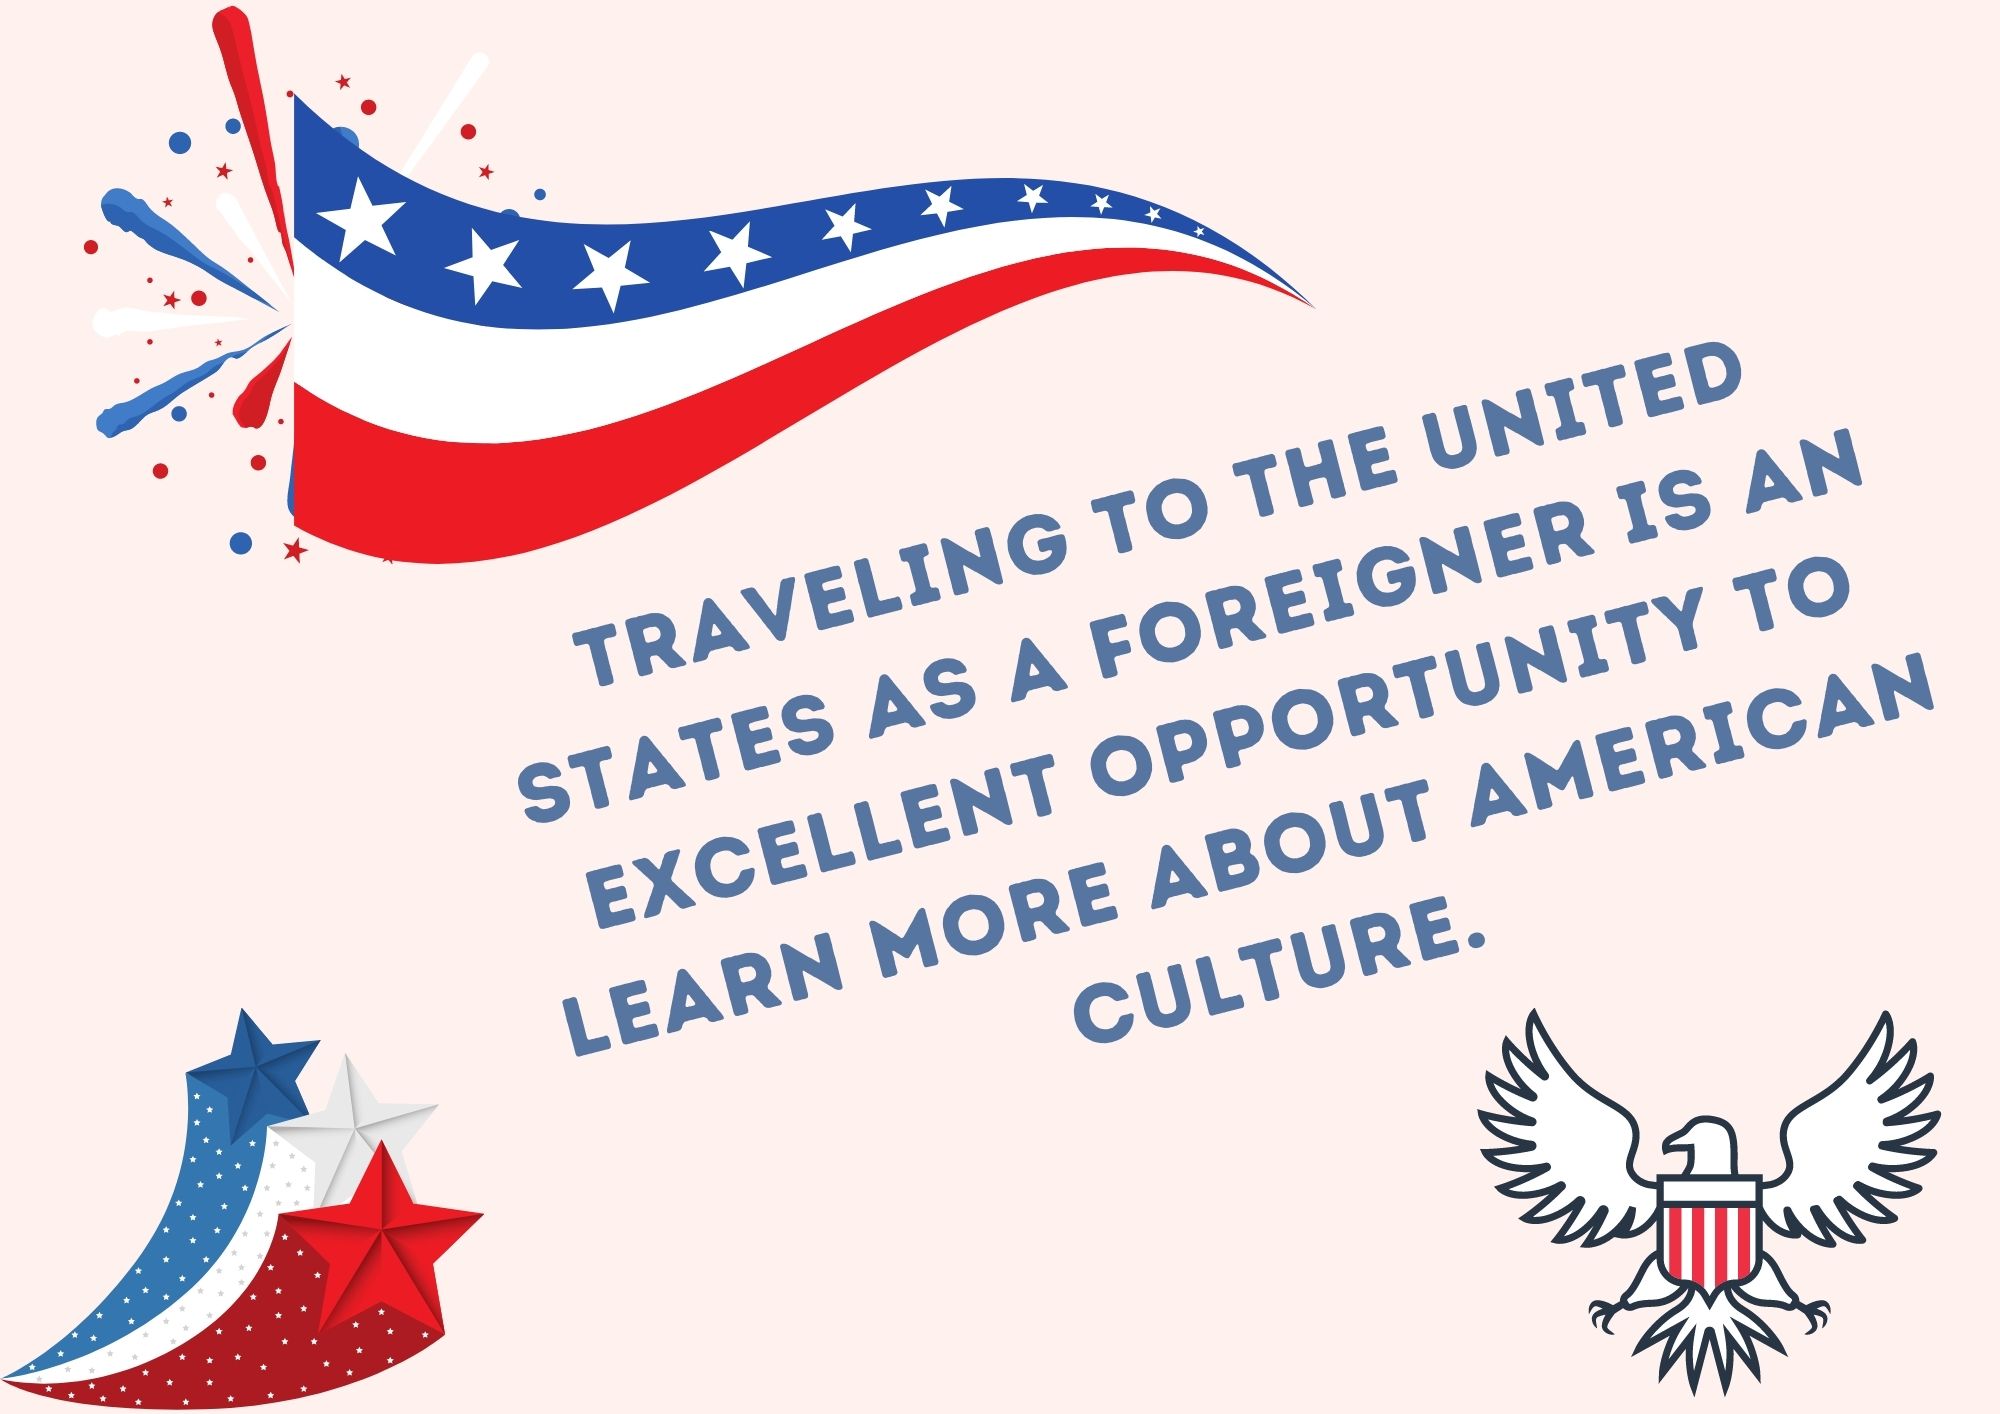 Traveling to the United States as a foreigner is an excellent opportunity to learn more about American culture.